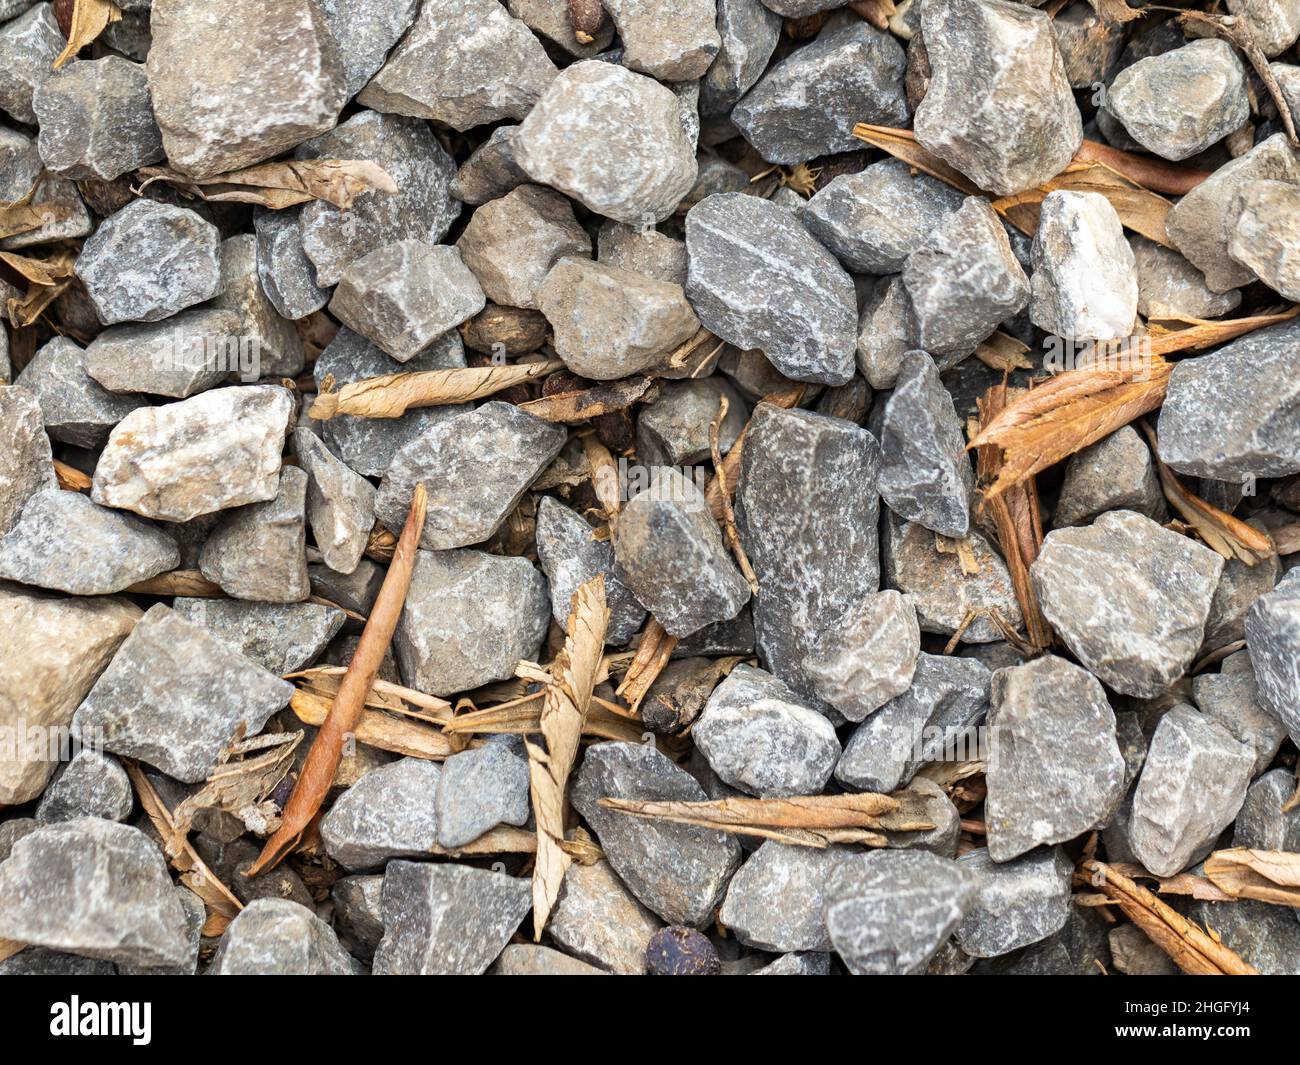 Texture of gravel scattered on the ground Stock Photo